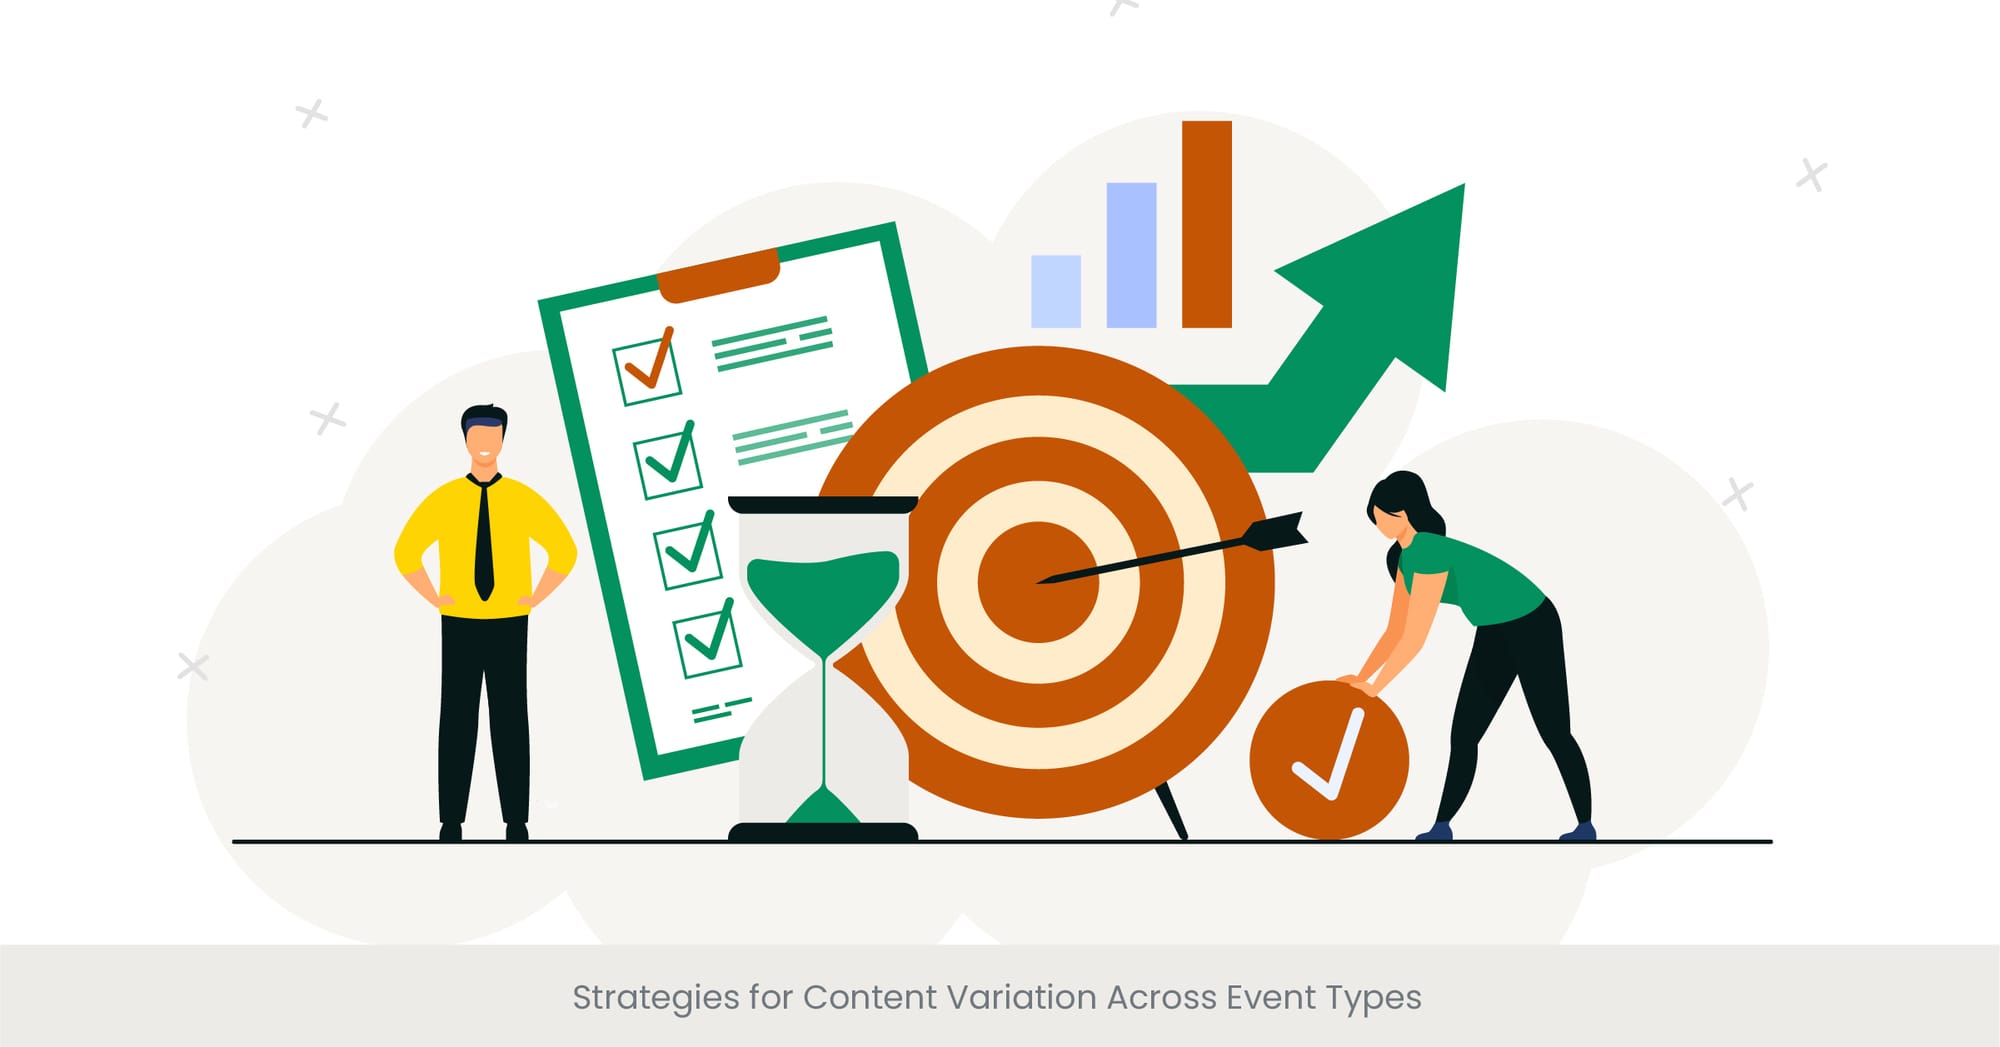 Strategies for Content Variation Across Event Types